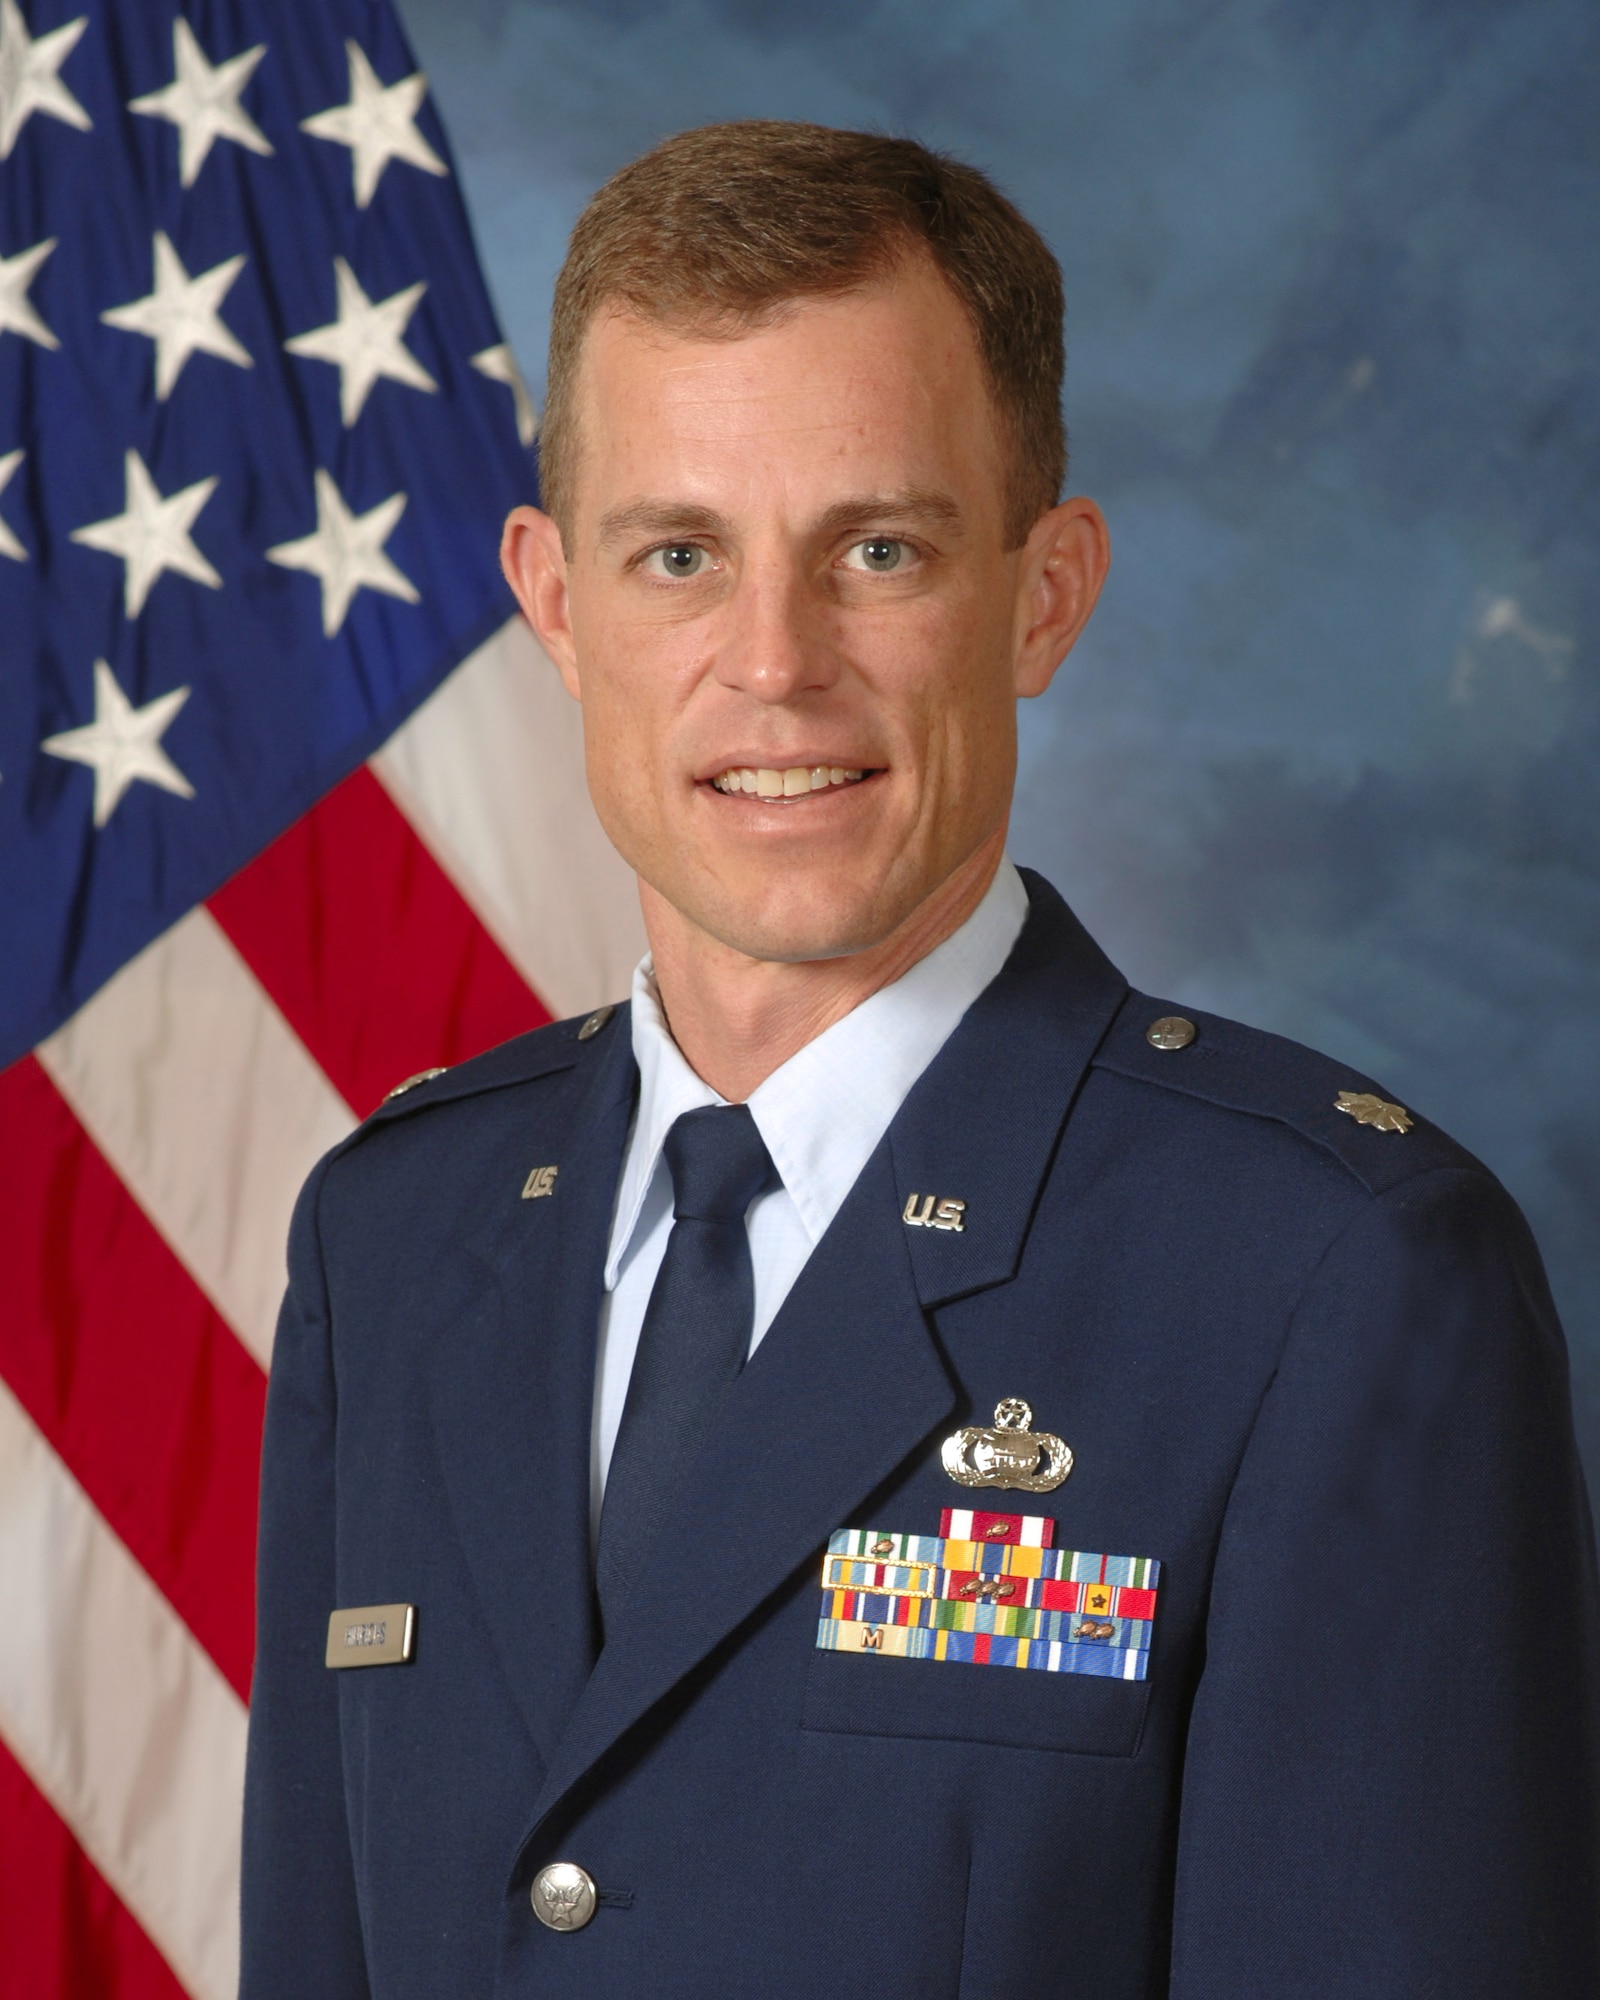 Lt. Col. Jeff Hinrich, an individual mobilization augmentee with the 11th Intelligence Squadron, is the 2007 Air Force Special Operations Command IMA Officer of the Year. (U.S. Air Force photo)